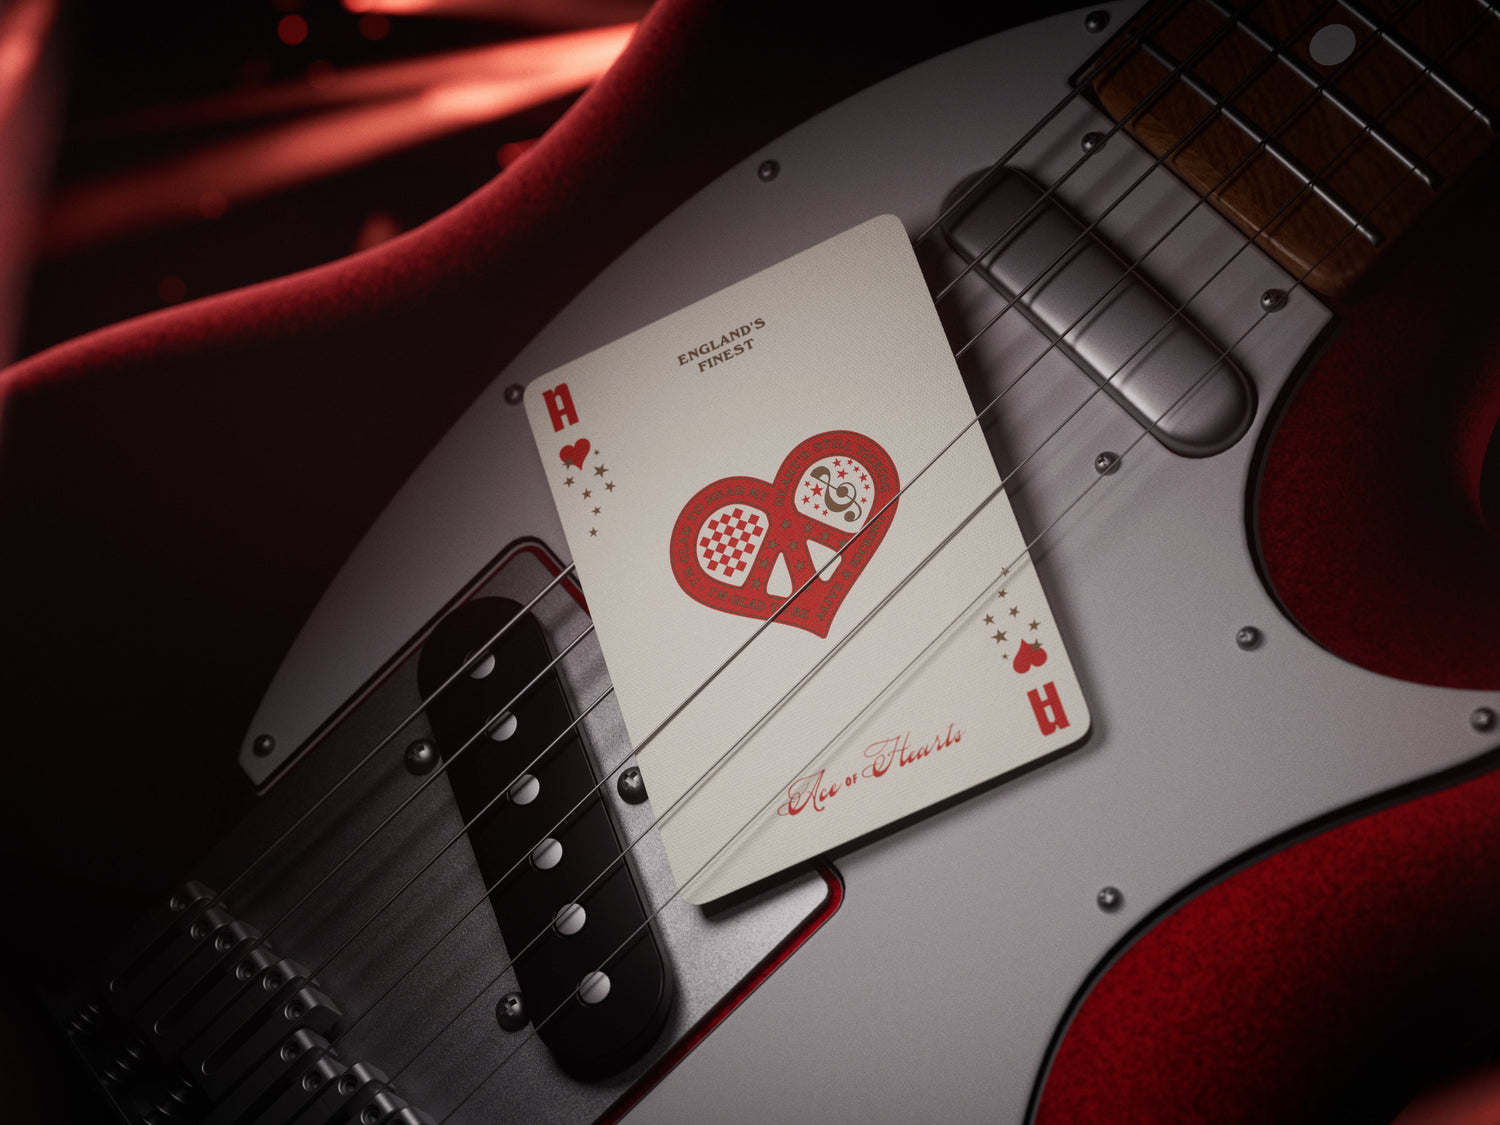 The Rolling Stones Playing Cards